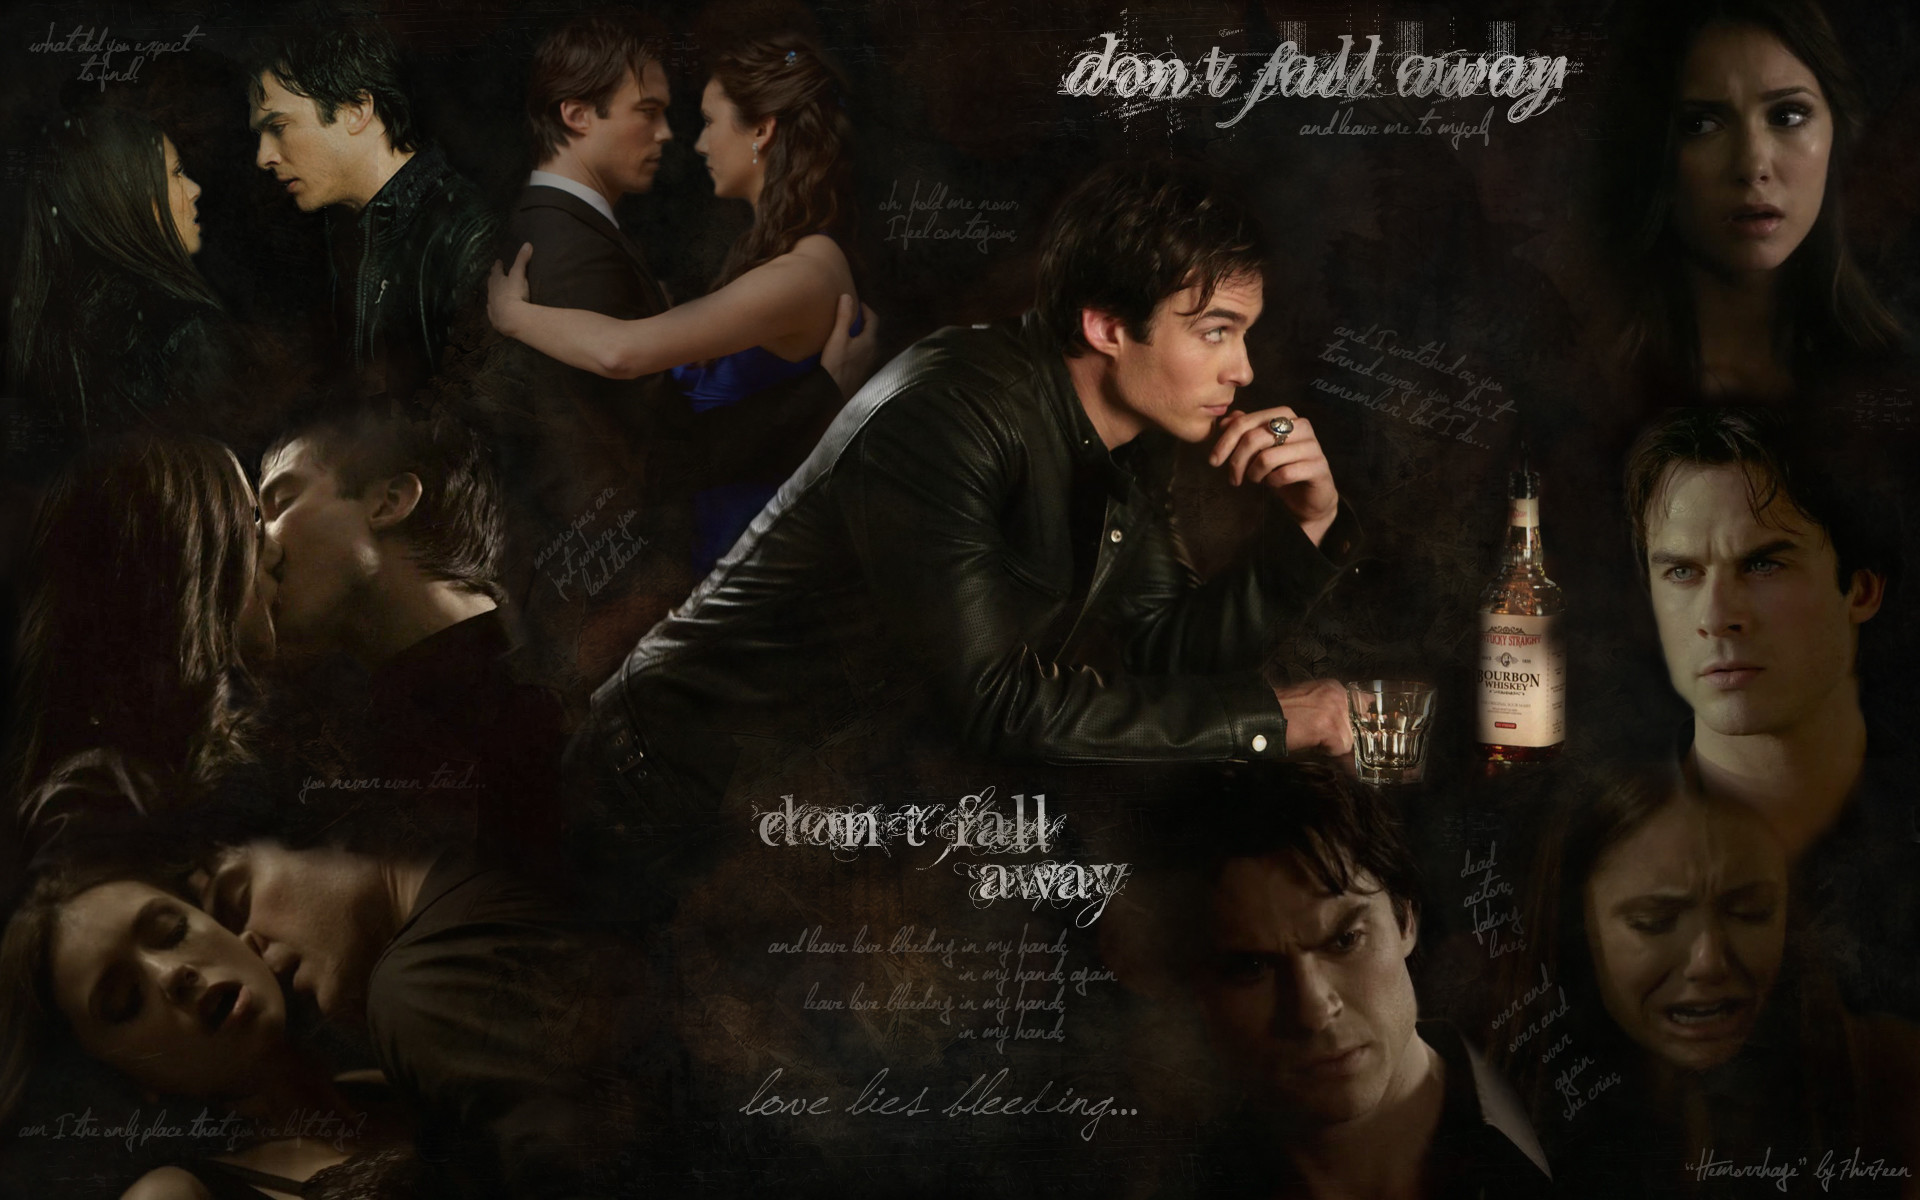 1920x1200 An Elena/Damon wallpaper made HD Wallpaper and background photos of  "Hemorrhage" -- Damon and Elena for fans of The Vampire Diaries images.